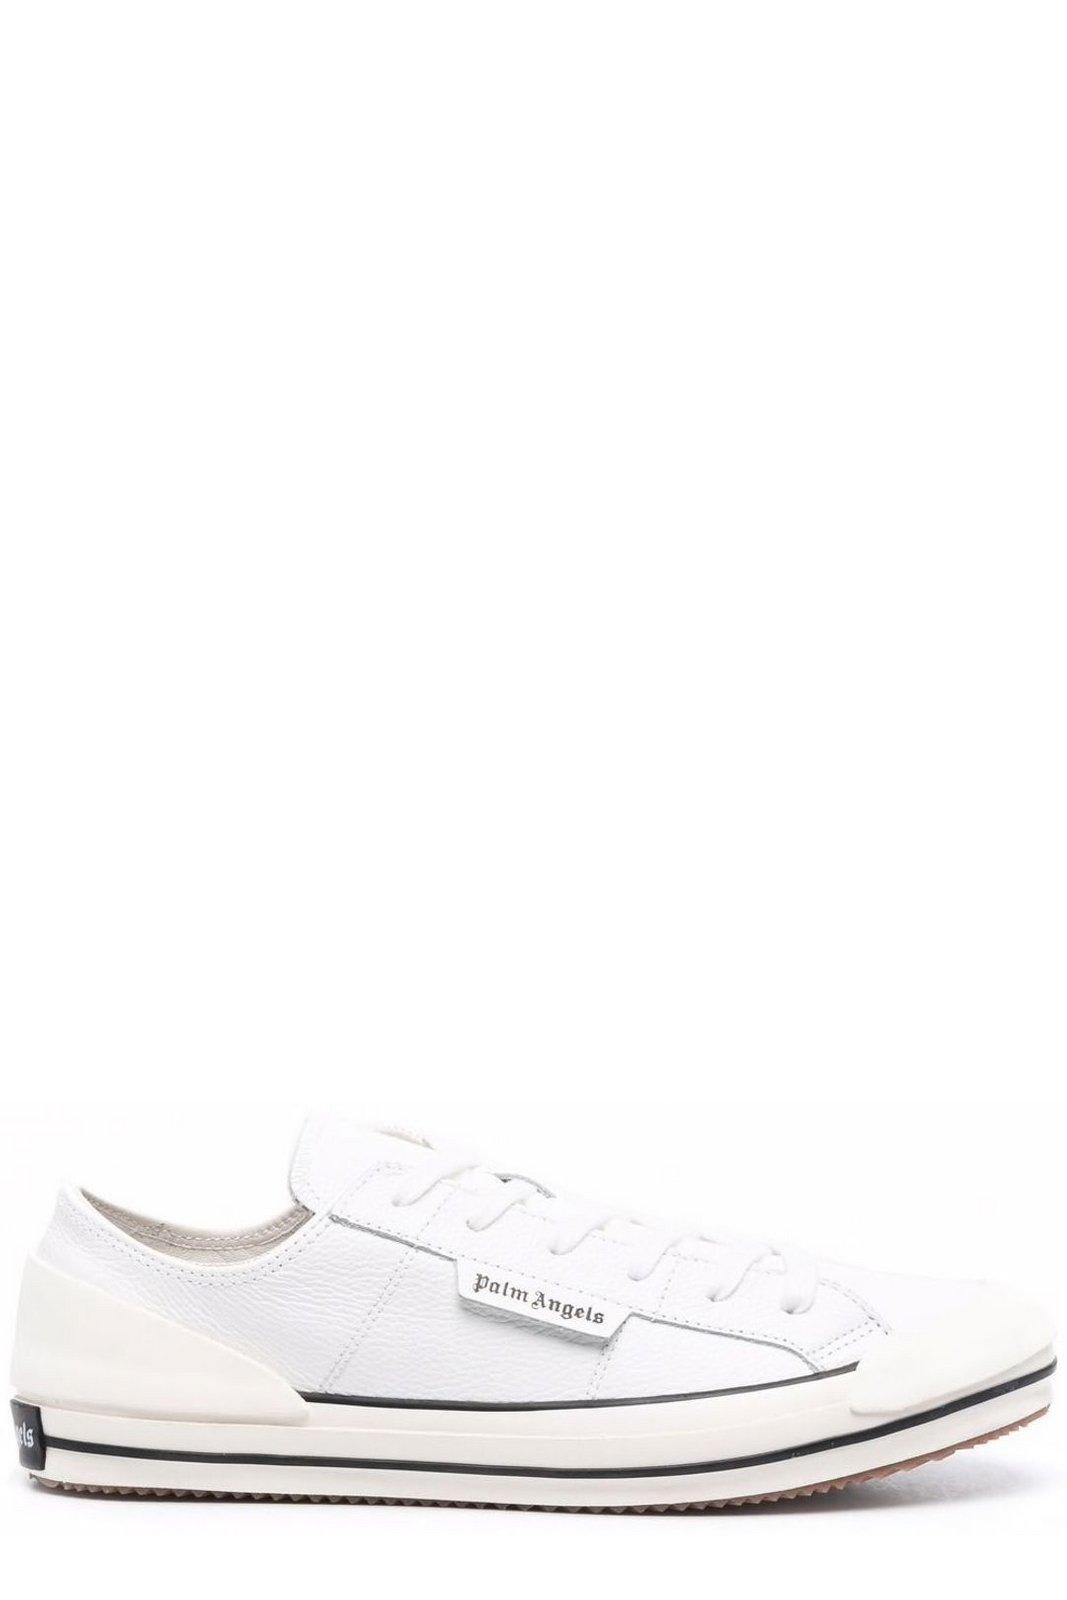 Logo Printed Lace-up Sneakers